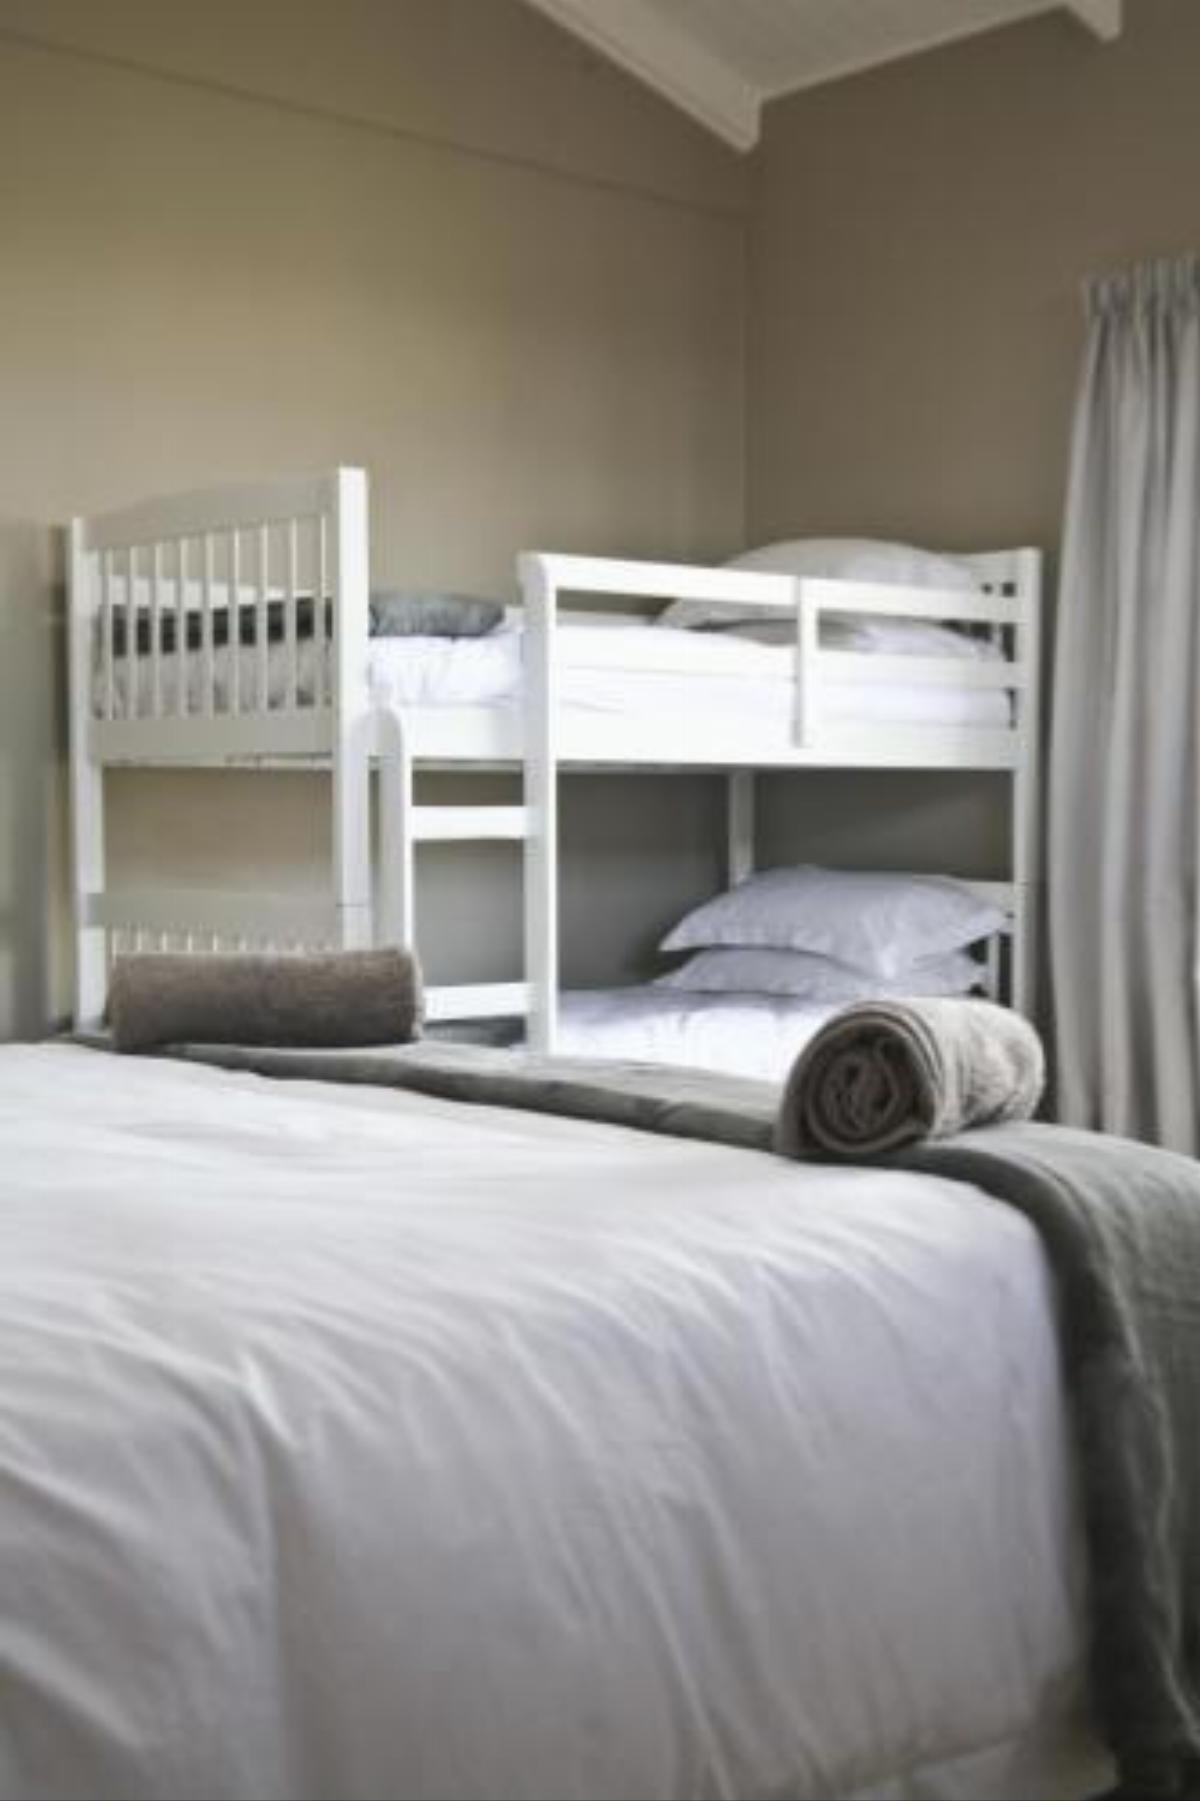 City of Saints Self -Catering Guest Cottage Hotel Grahamstown South Africa